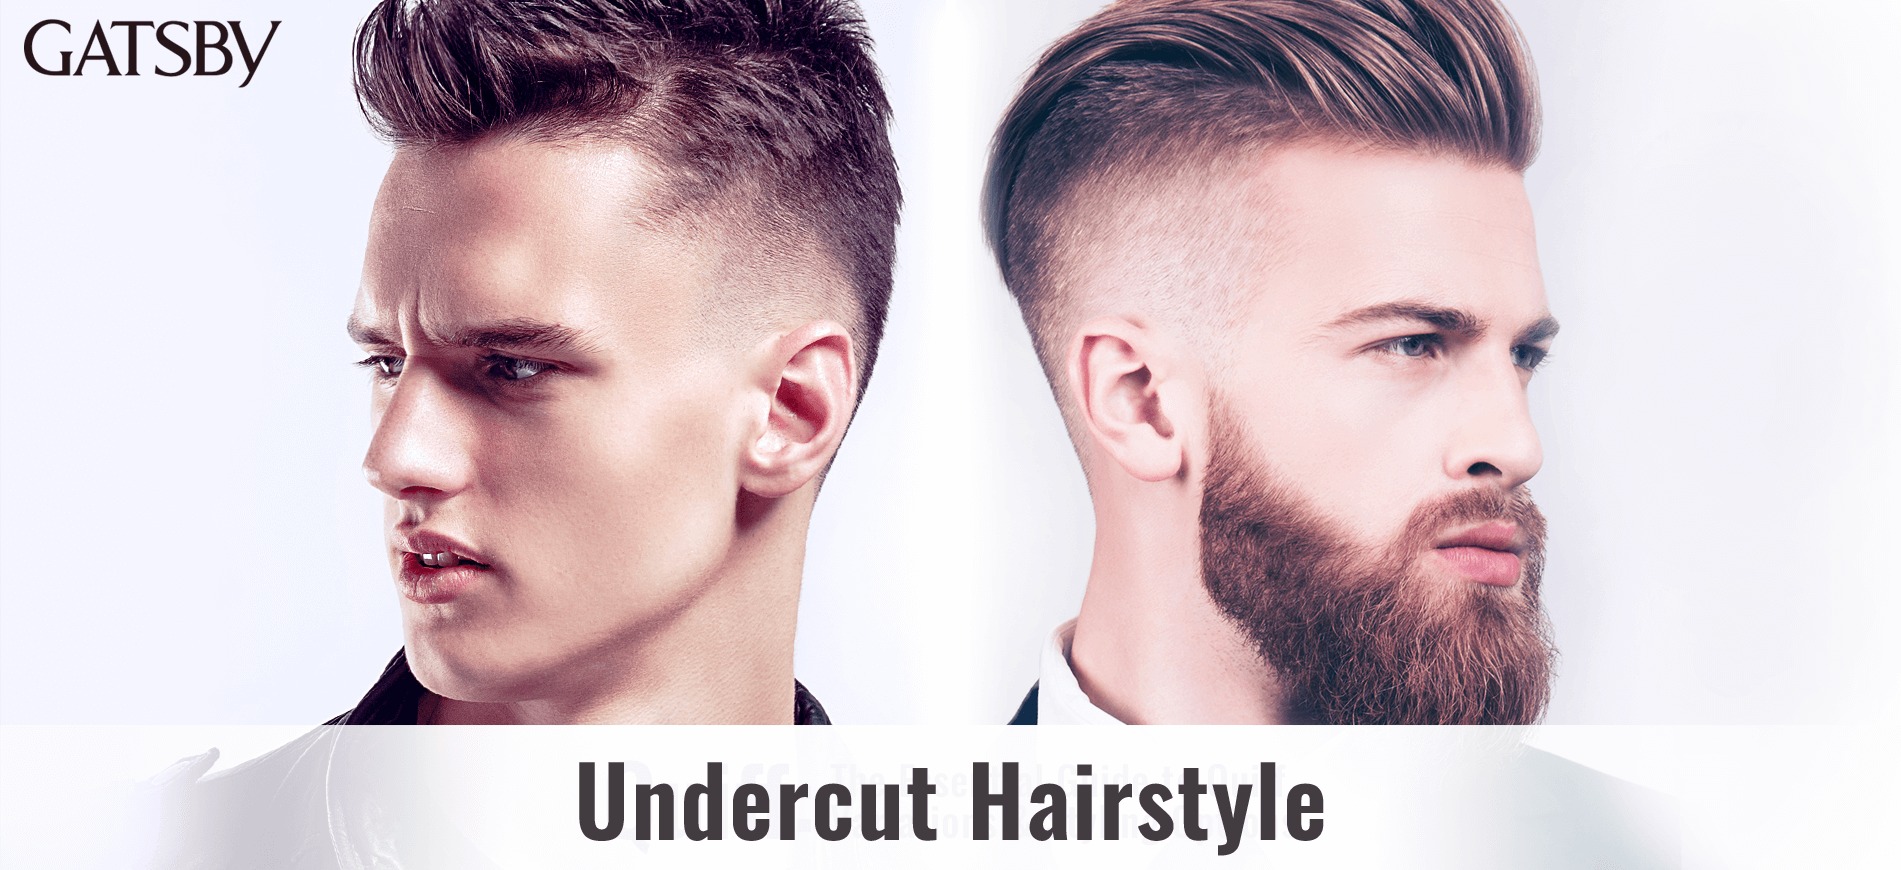 The Essential Guide to Men's Undercut Hairstyles by GATSBY ...